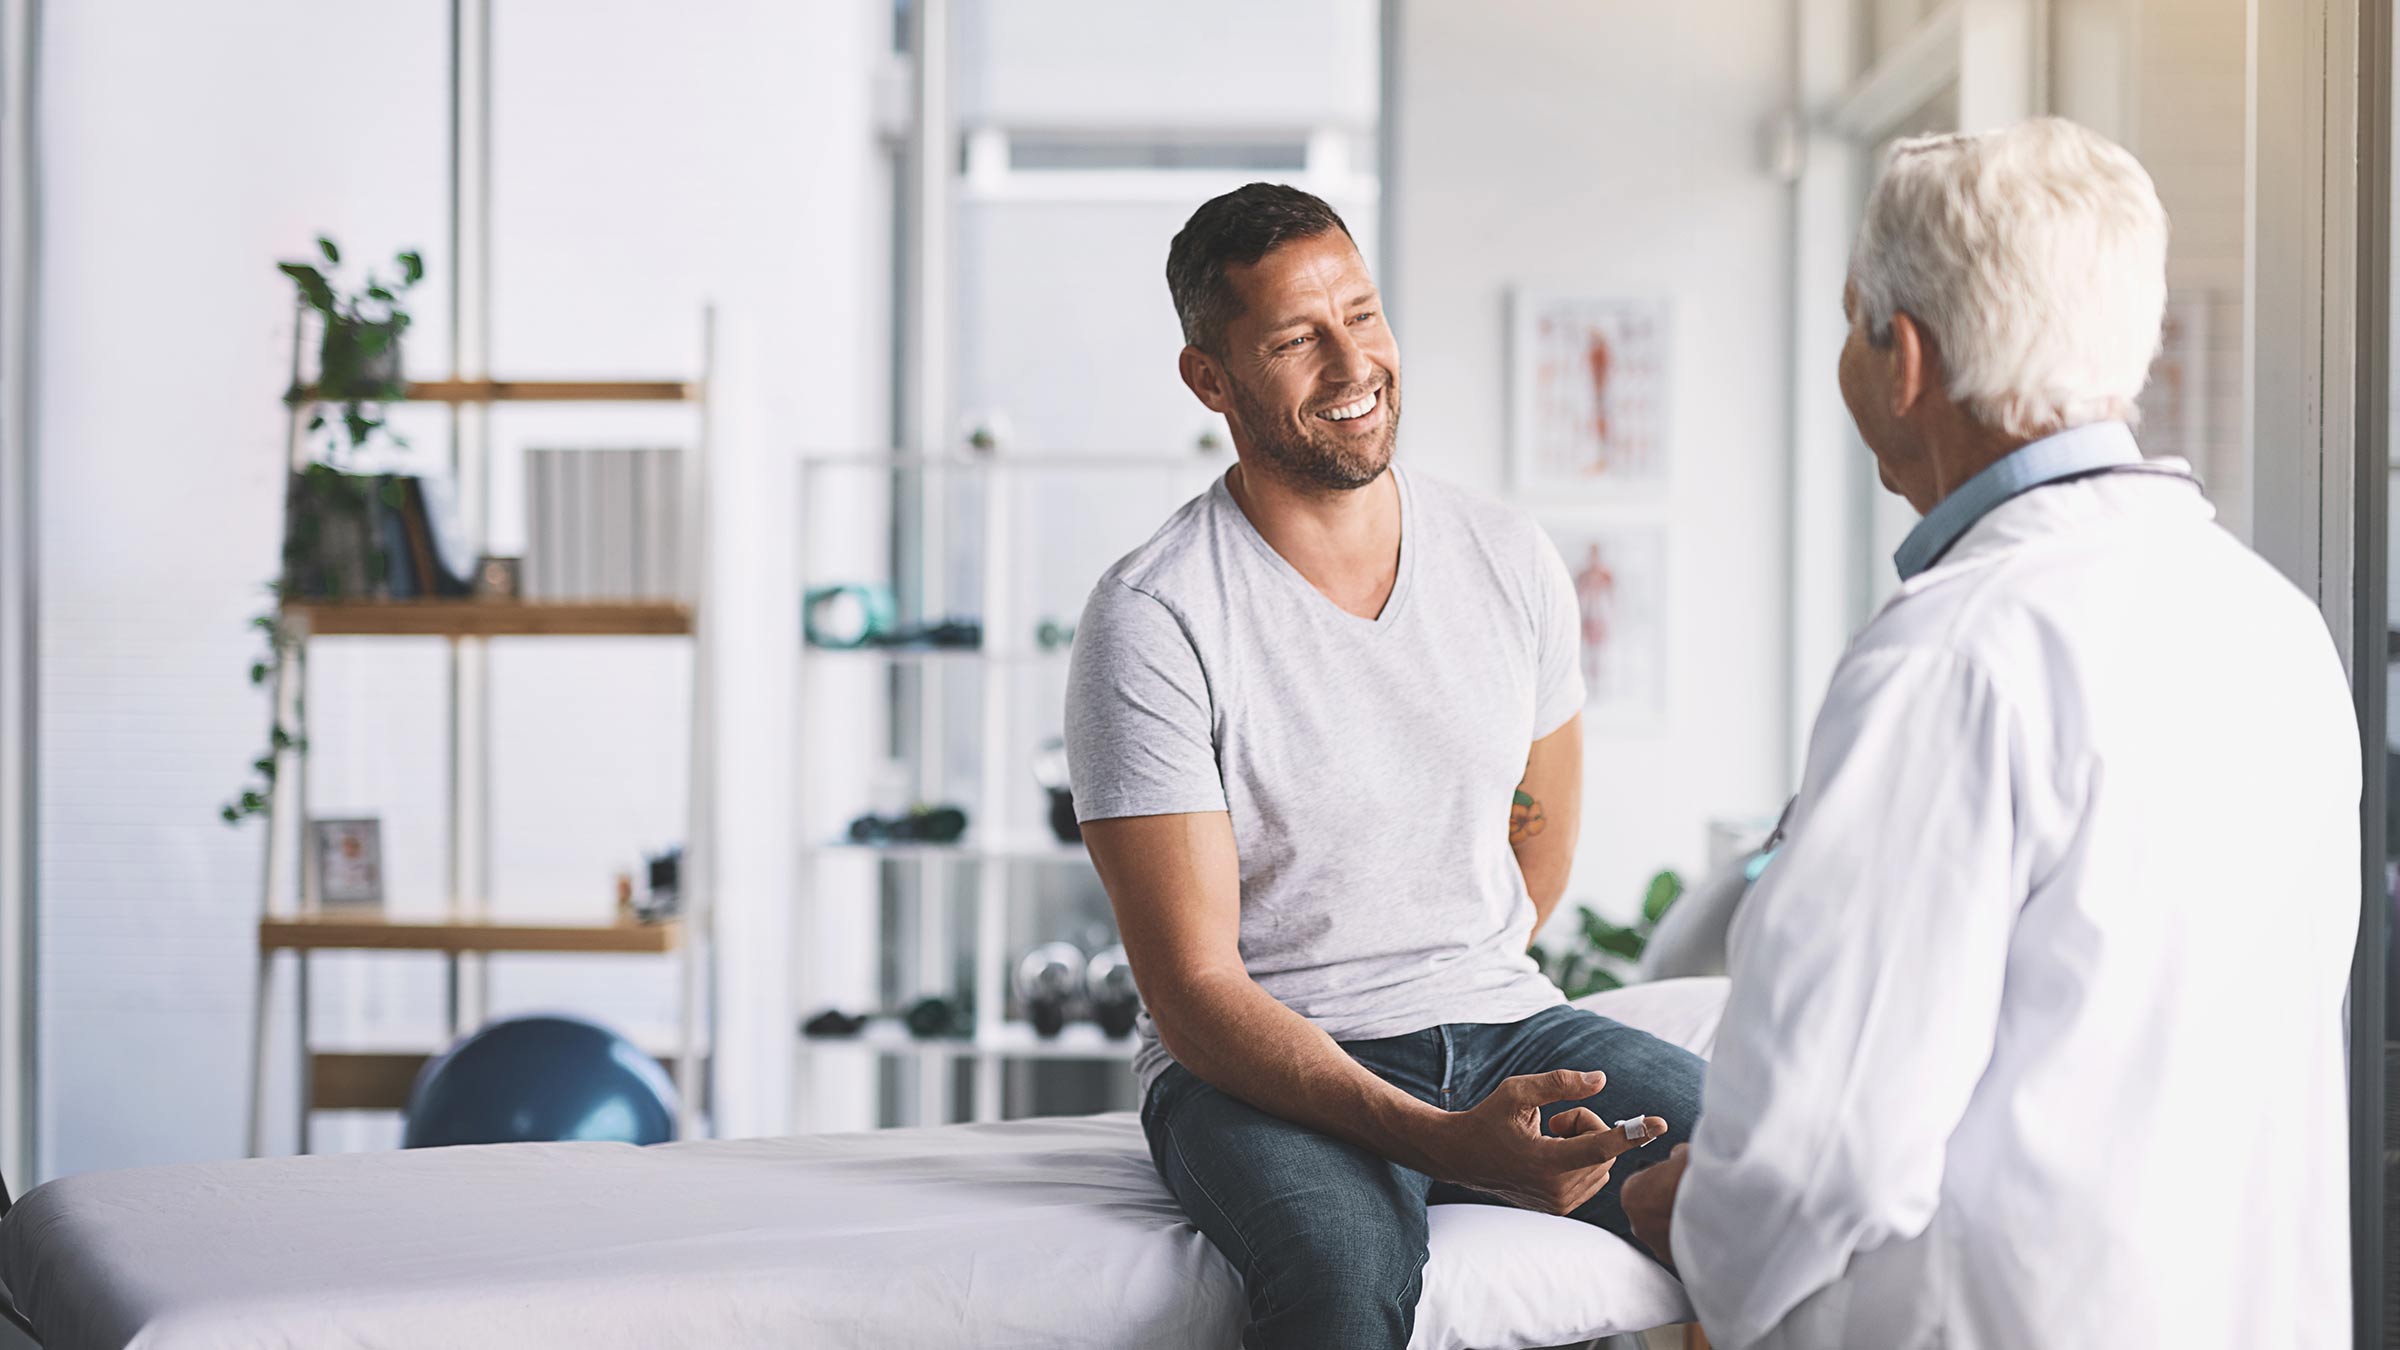 An adult male meeting with a physician